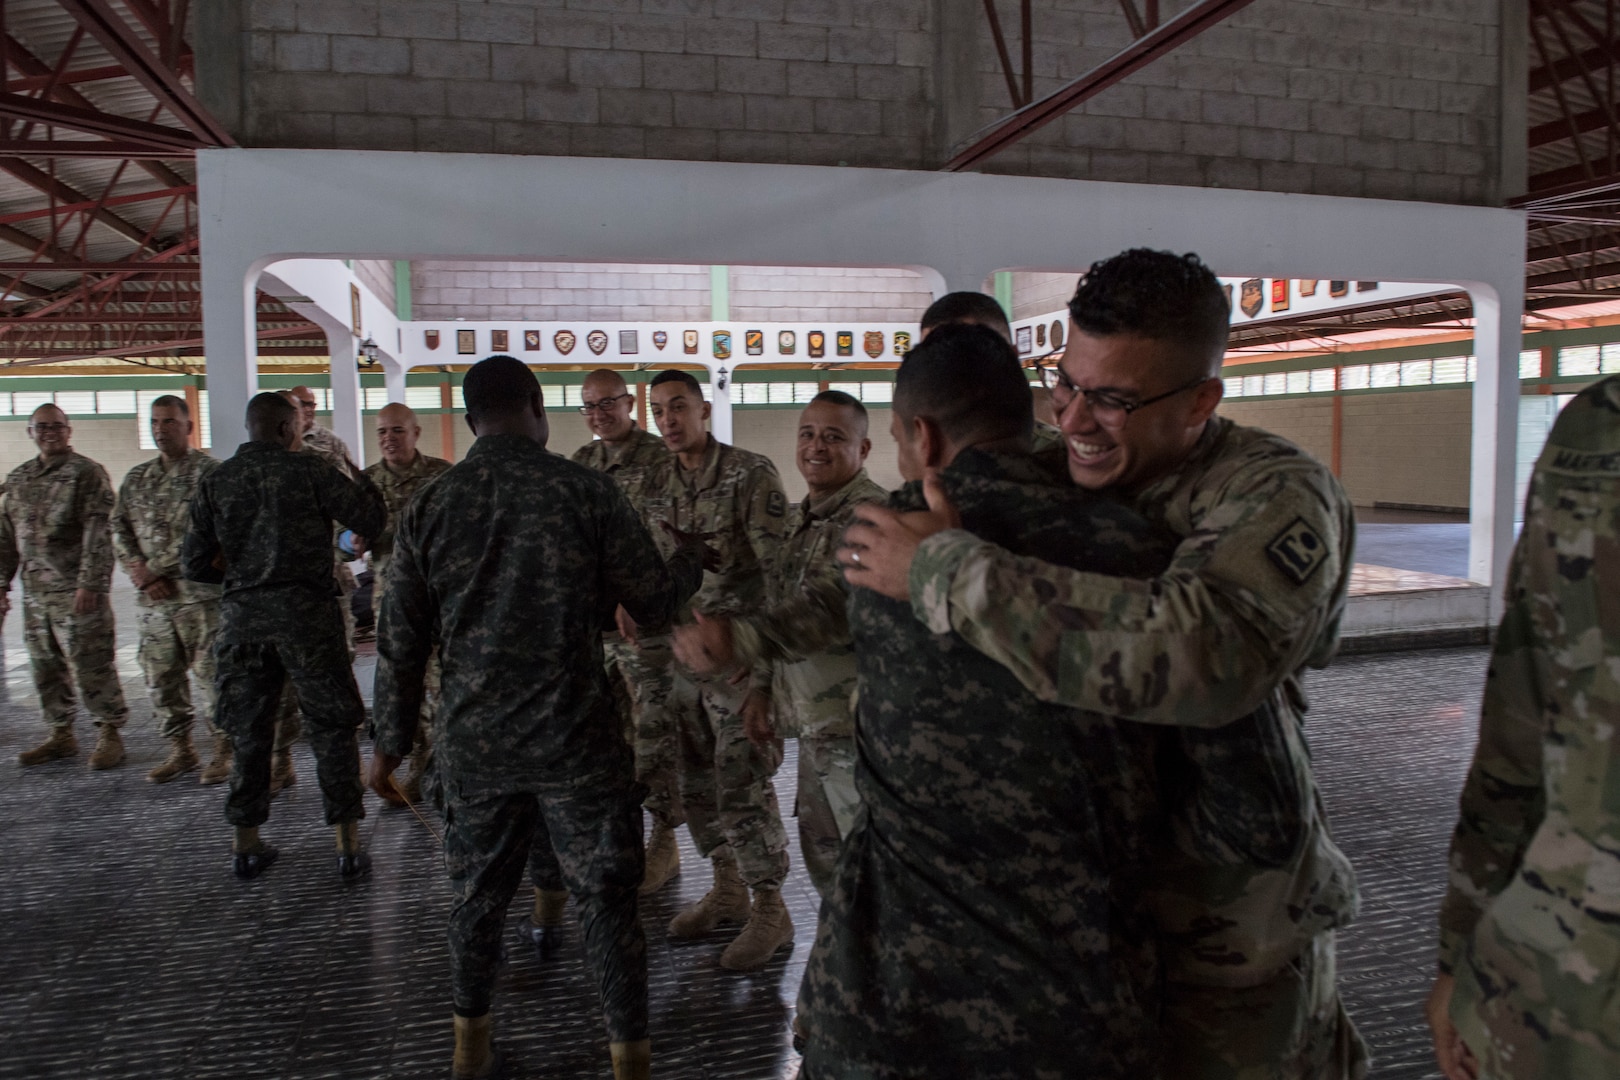 A U.S. Army and Honduran soldier shake hands embrace at the graduation of the Honduran Security Forces Training (SFT) course June 10, 2019, at the 1st Artillery Battalion in Zambrano, Honduras. Honduran Army soldiers participated in the two-week SFT course led by U.S. Army Puerto Rico National Guard service members assigned to Task Force ¬¬– Borinqueneer. The course taught them about security techniques and procedures to include formation, breaching, weapons training, casualty care, vehicle searching and tactical control points. The training was hosted as way to strengthen the host nations counter threat ability. (U.S. Air Force photo by Staff Sgt. Eric Summers Jr.)